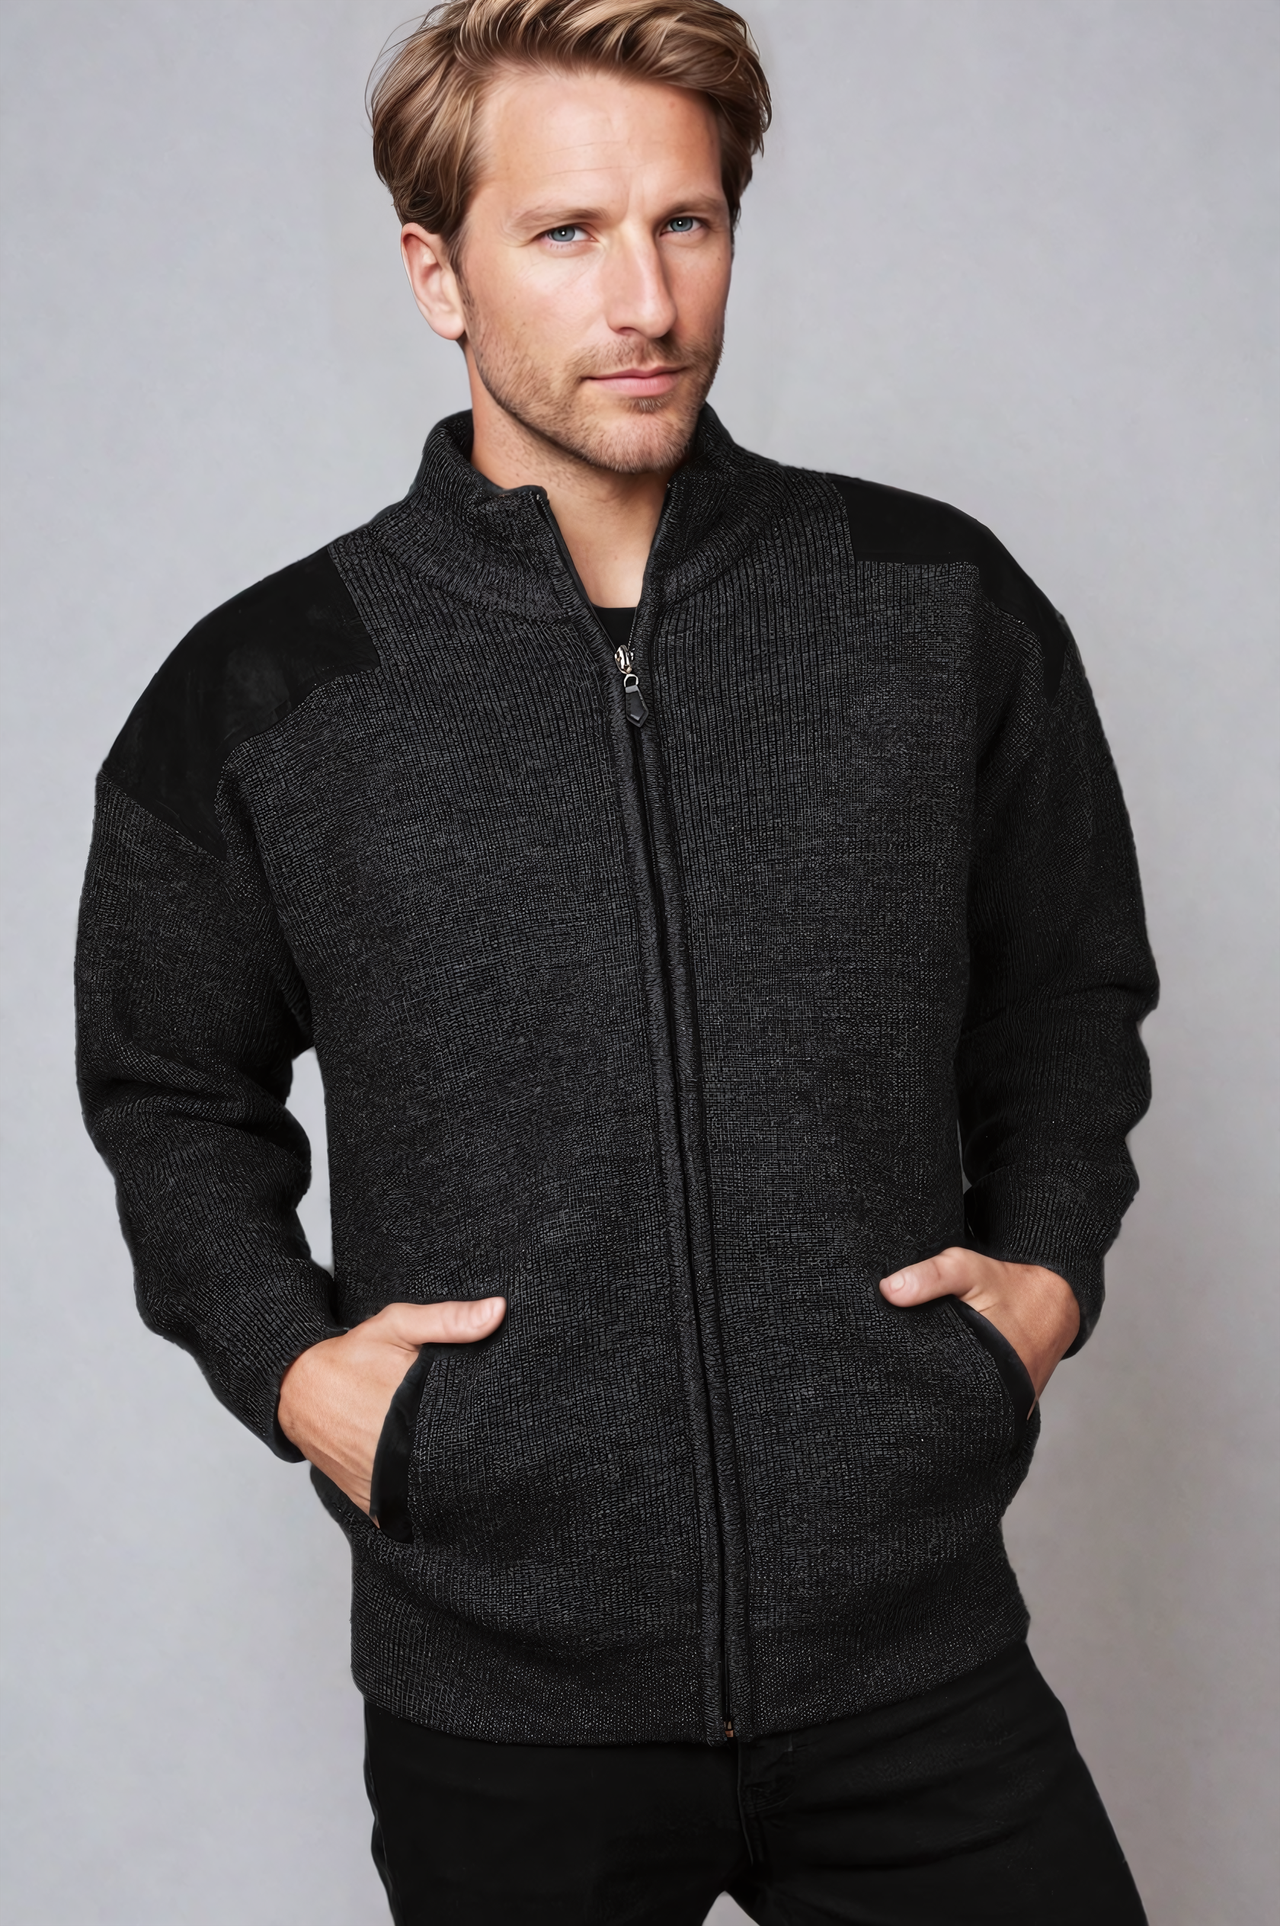 Ansett Wool Charcoal Zip Jacket With Black Elbow And Shoulder Patches